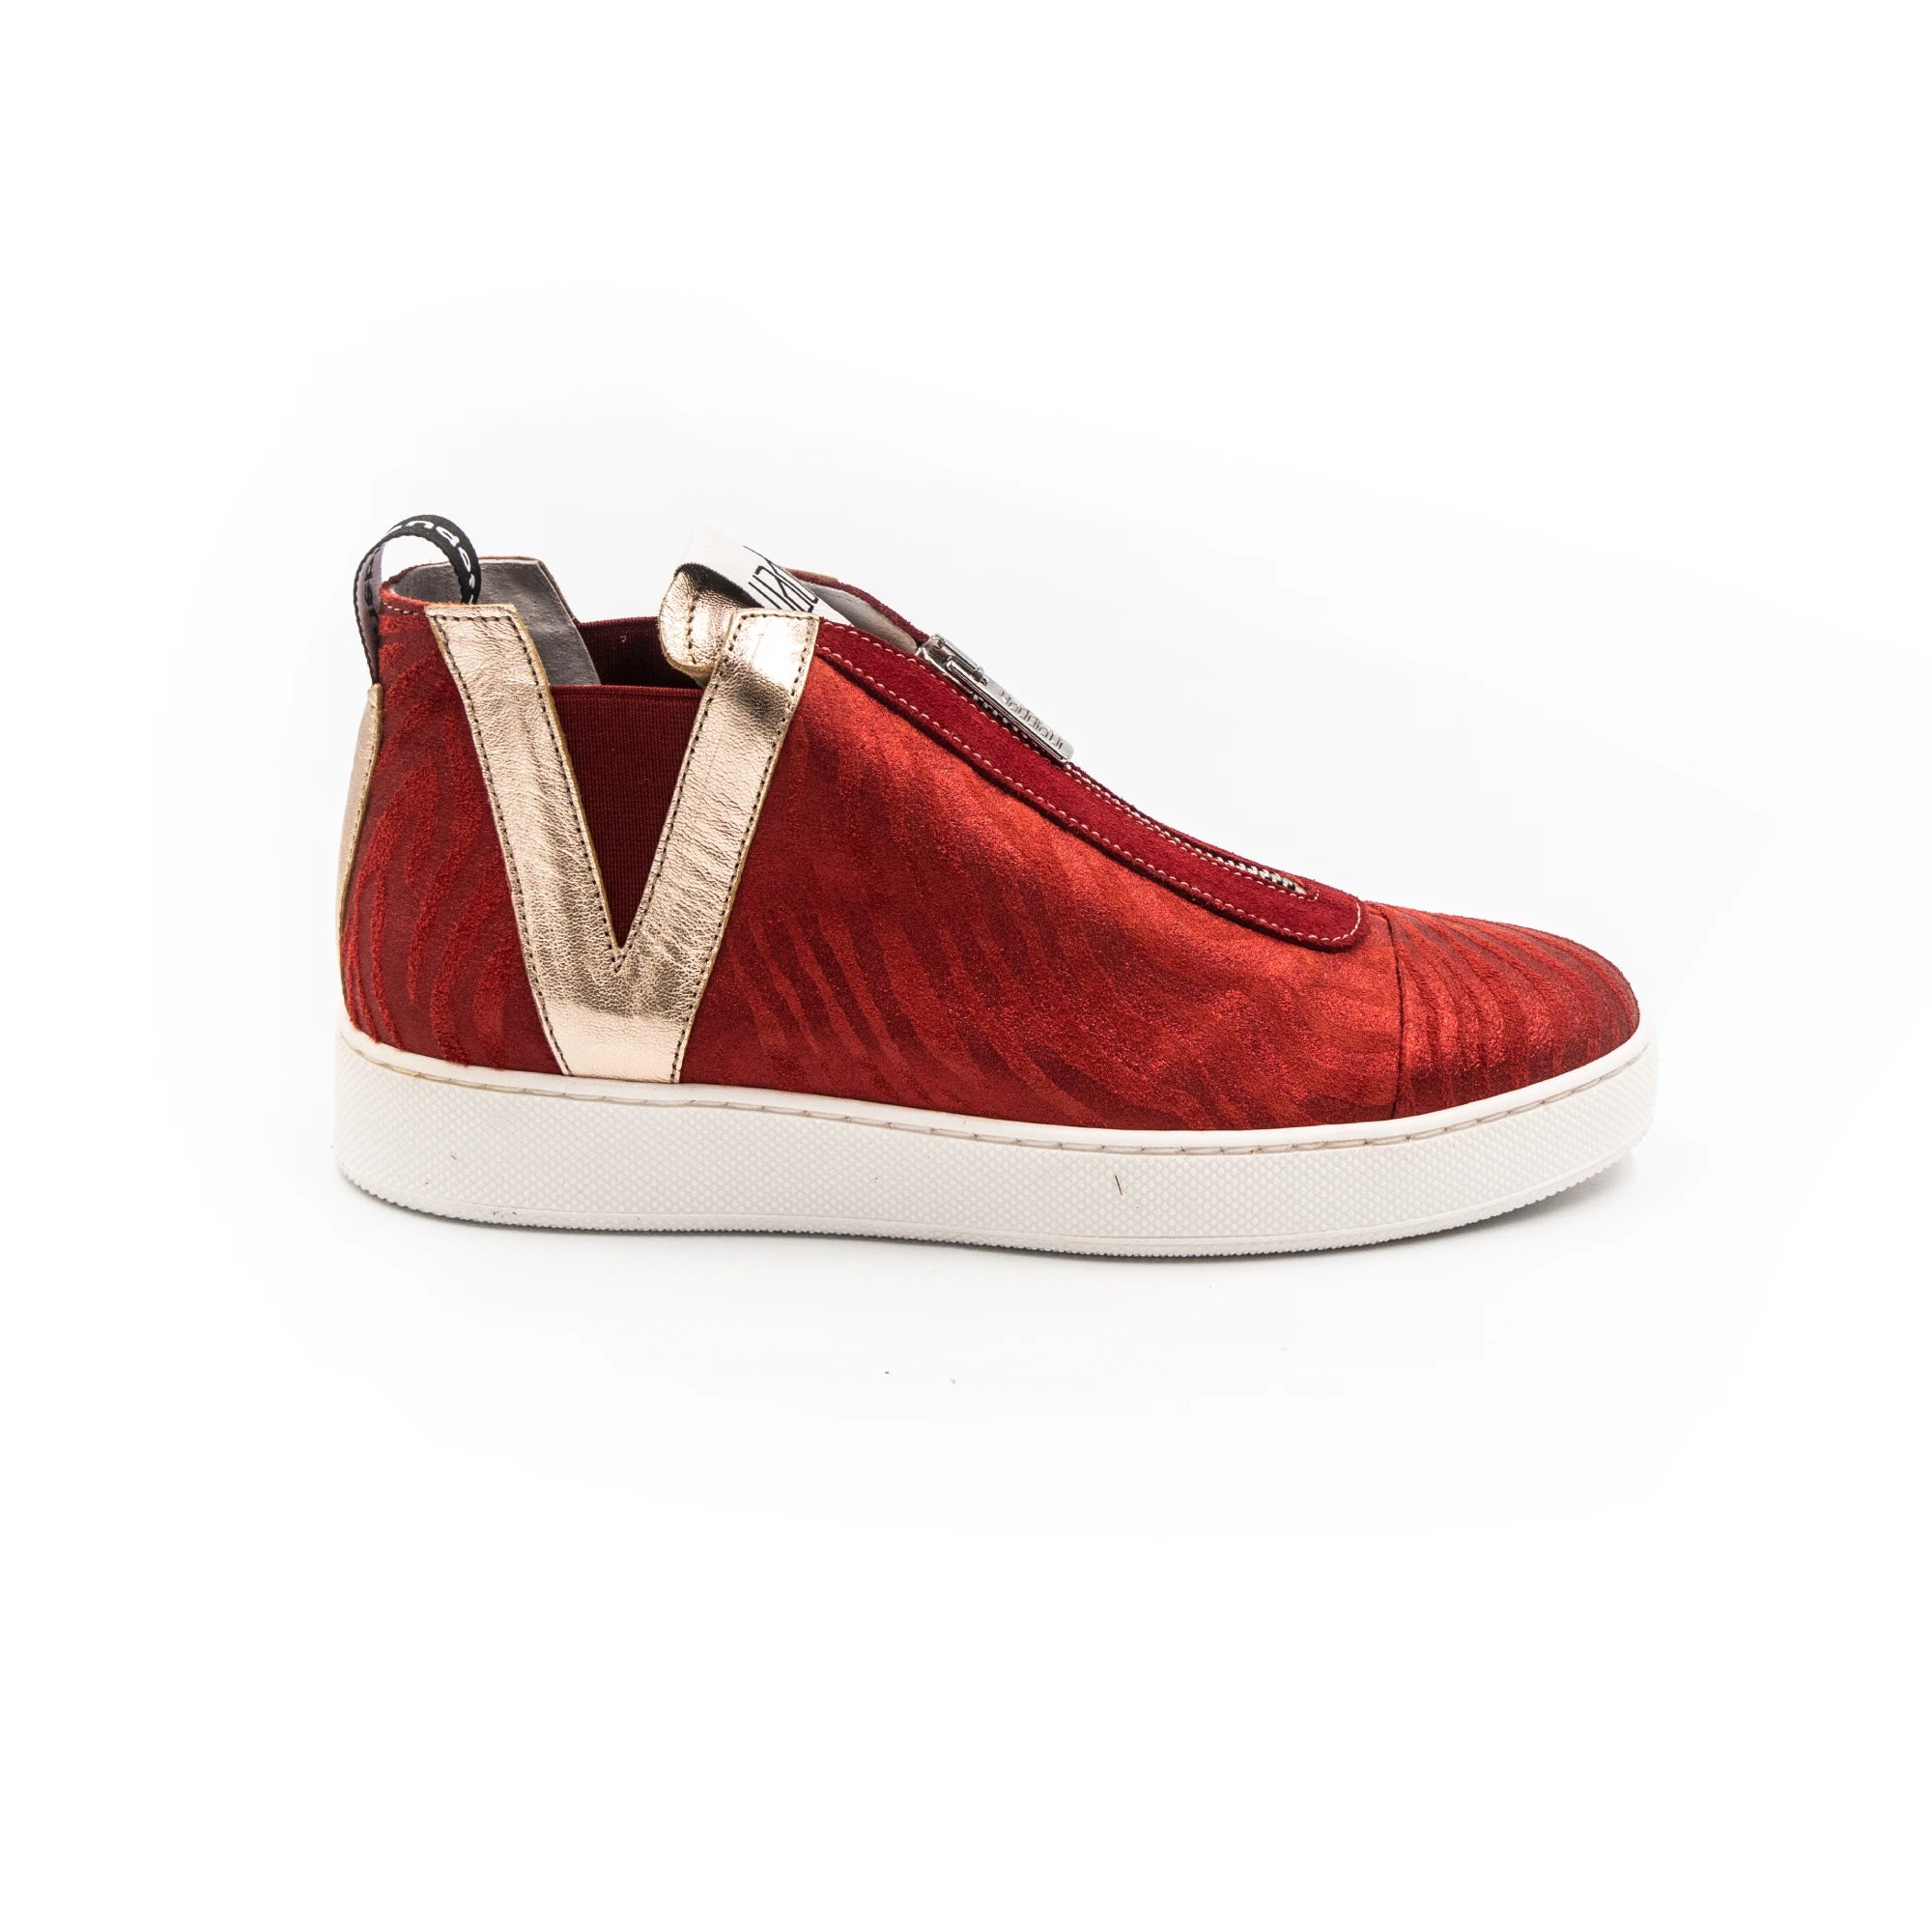 Sneakers with zipper and zebra pattern, in red.